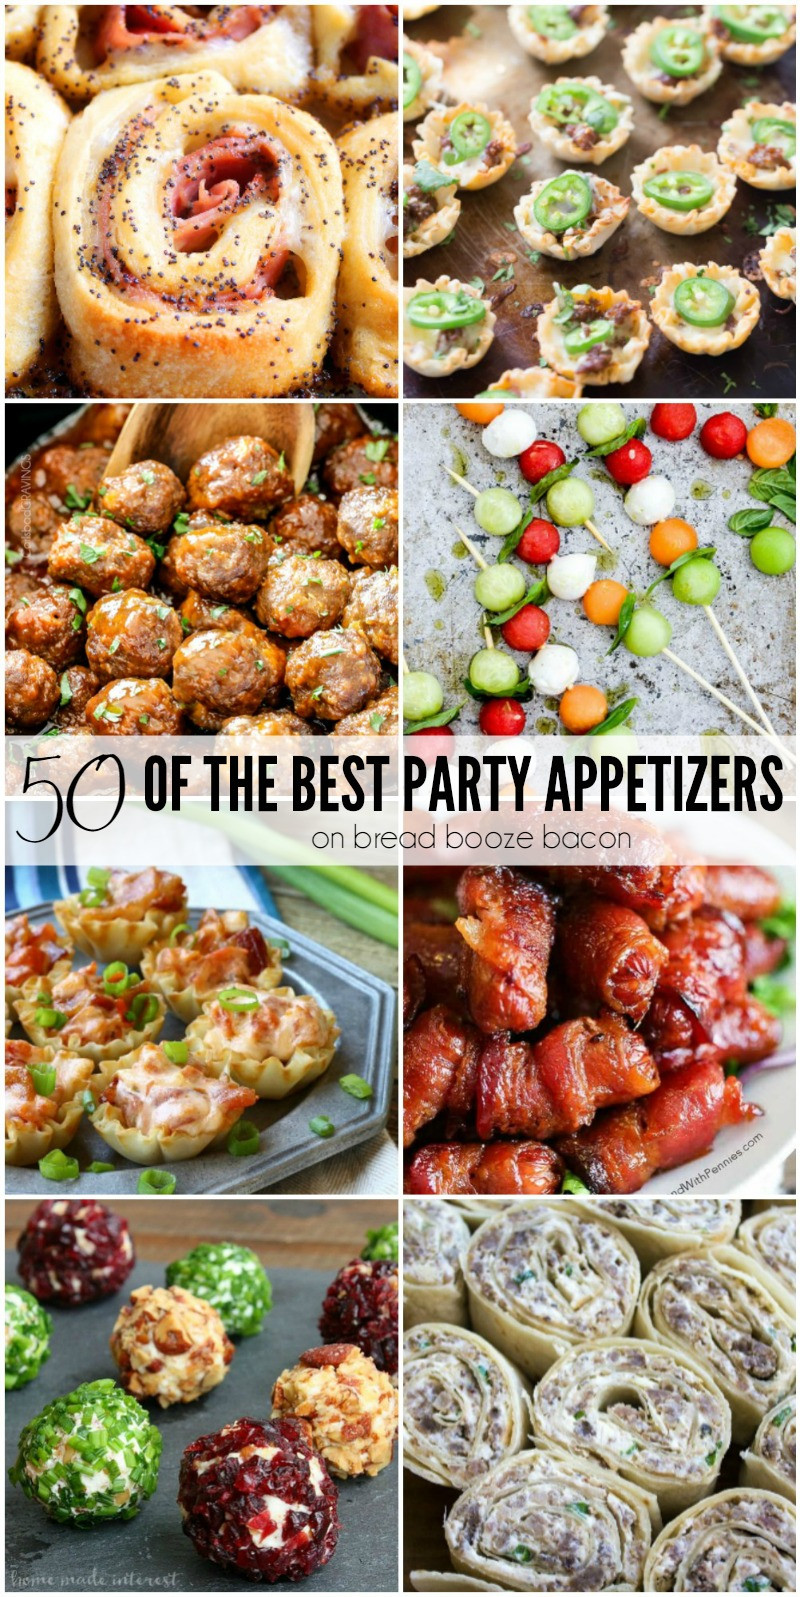 Food Ideas To Bring To A Party
 50 of the Best Party Appetizers • Bread Booze Bacon